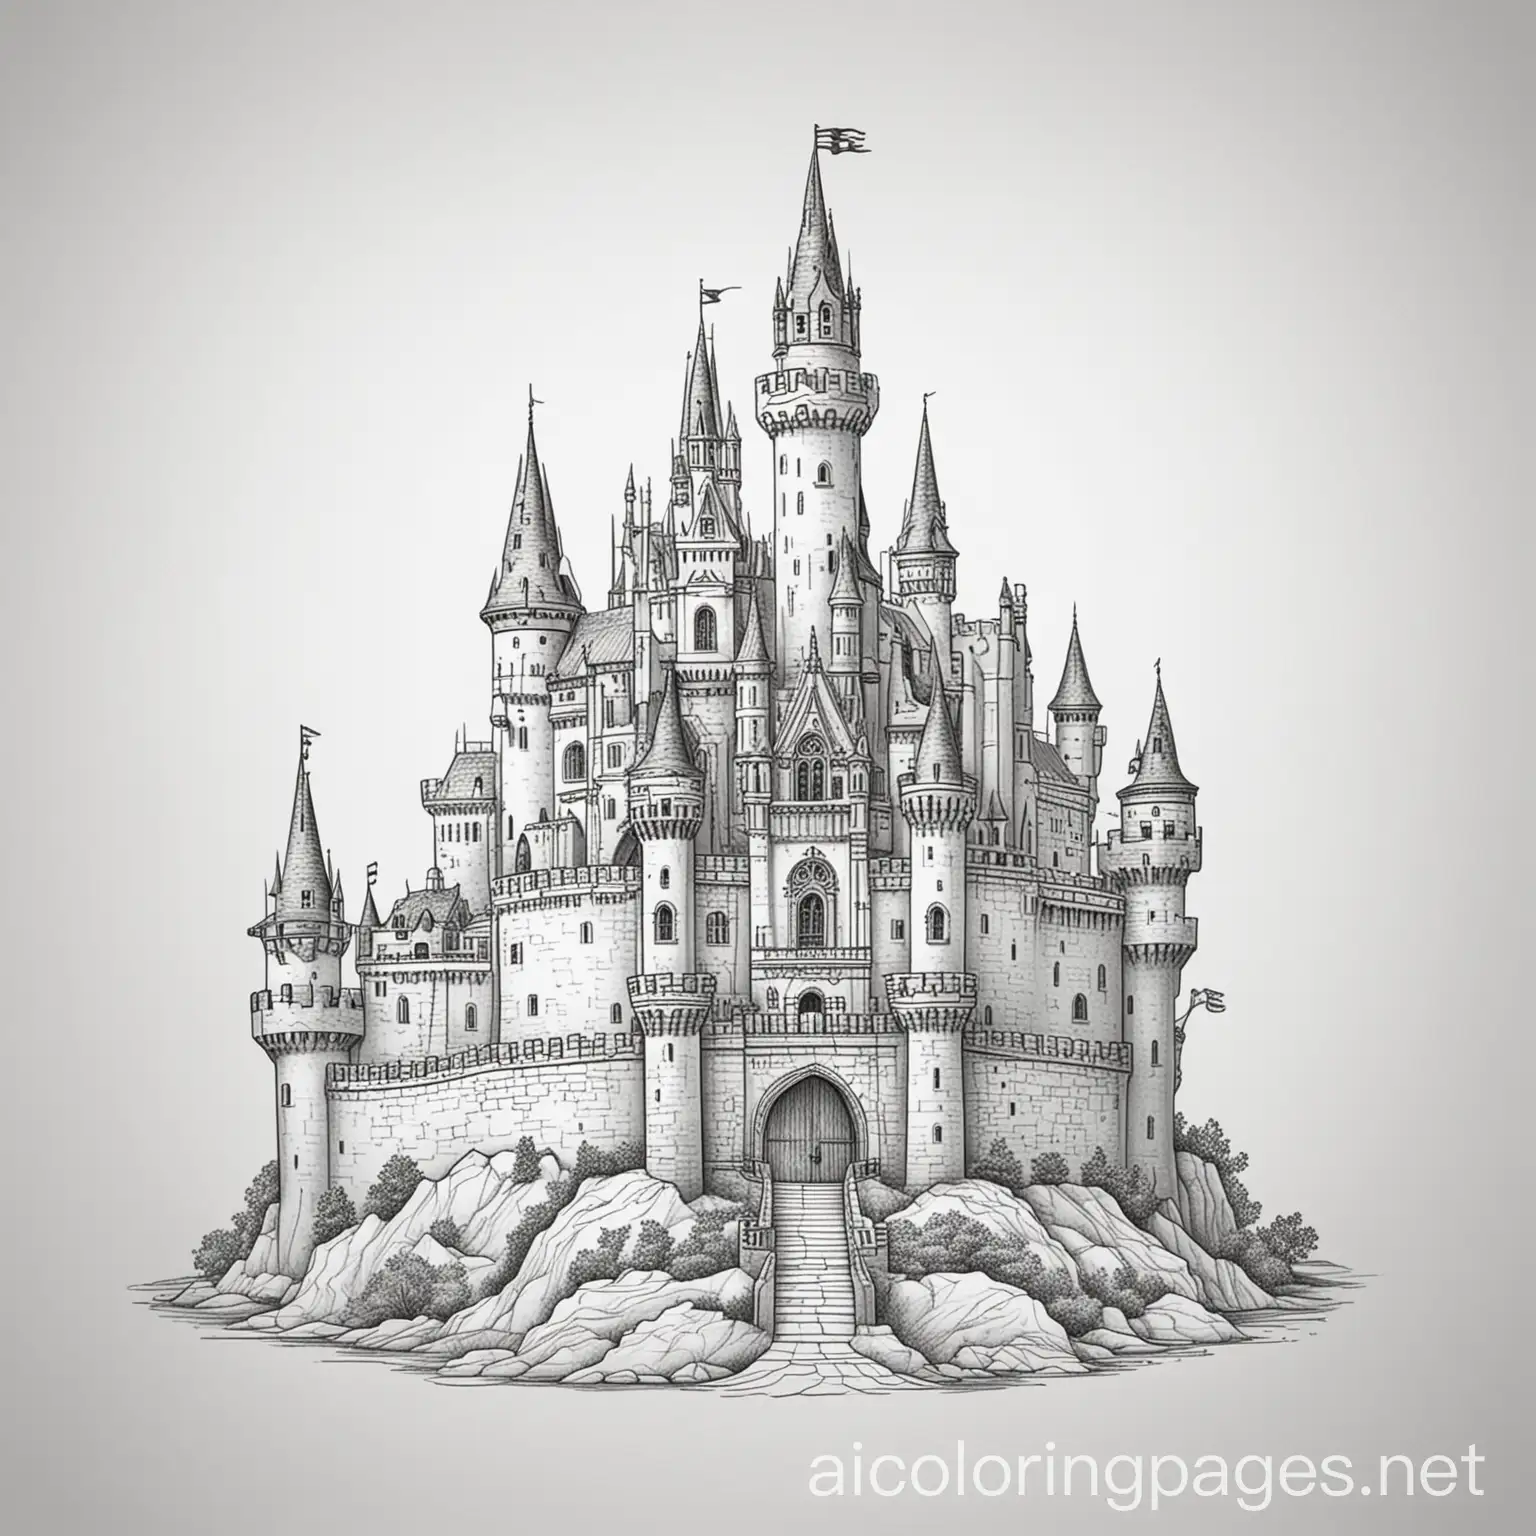 Medieval-Castle-Coloring-Page-Simple-Line-Art-on-White-Background